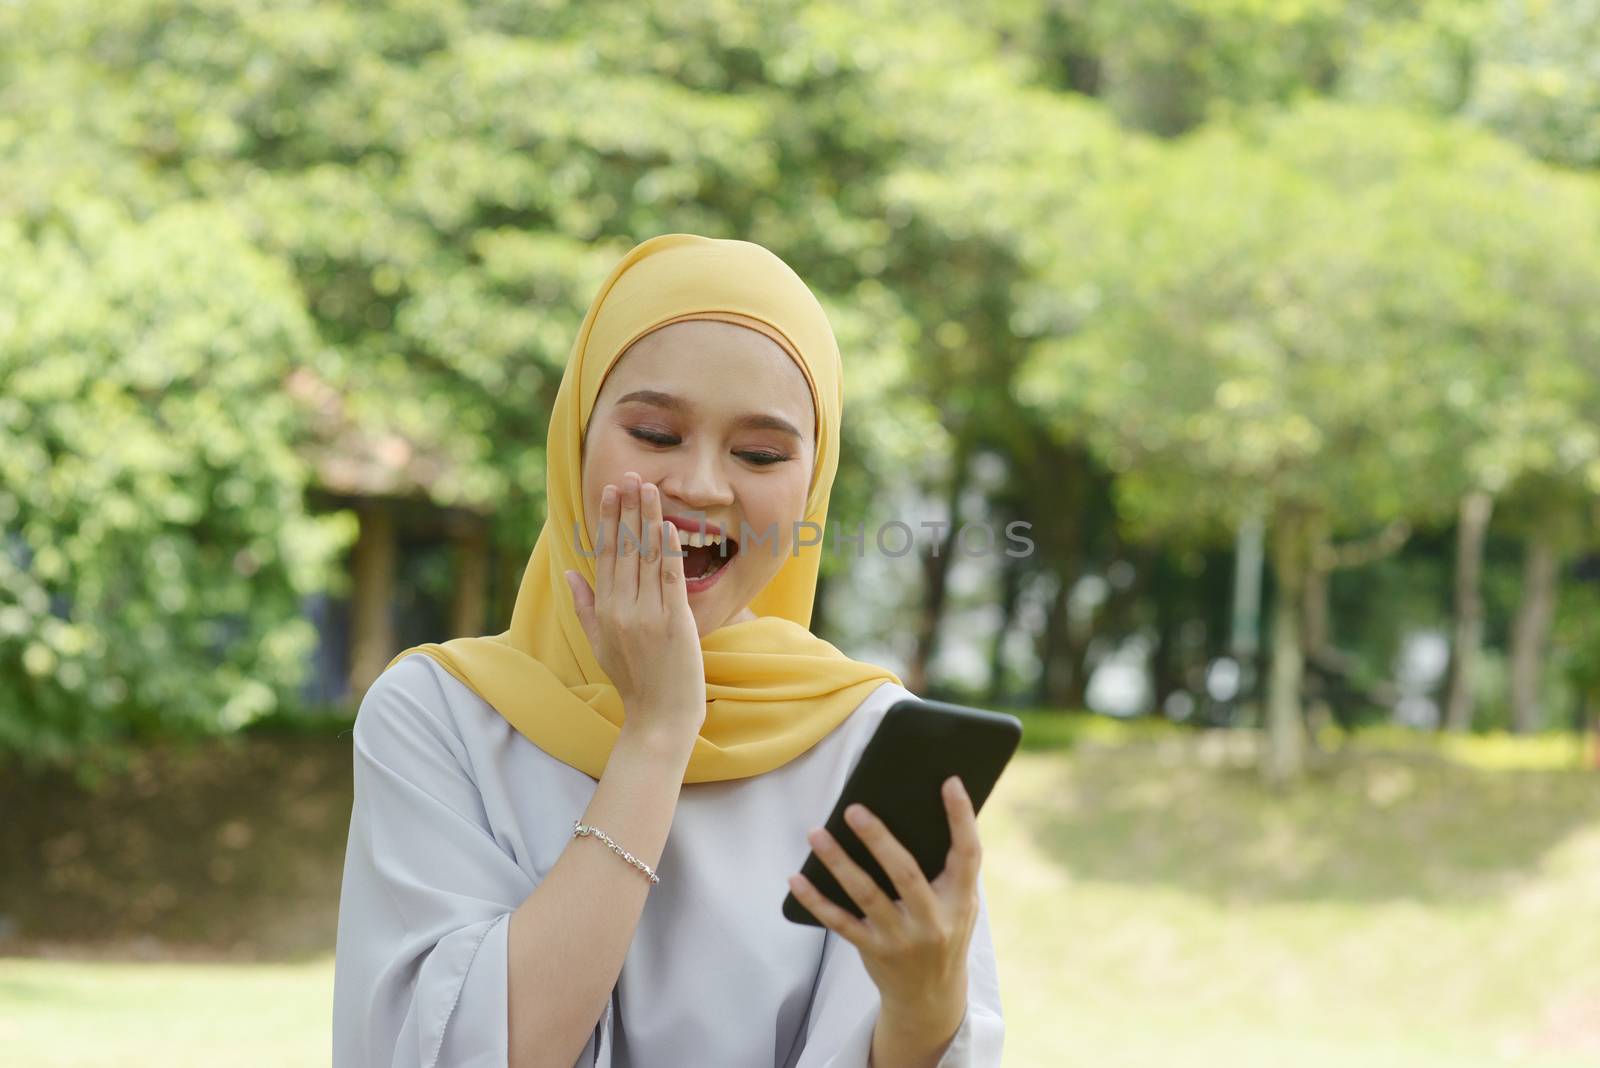 Portrait of cheerful Muslim girl using smartphone, smiling at outdoor.